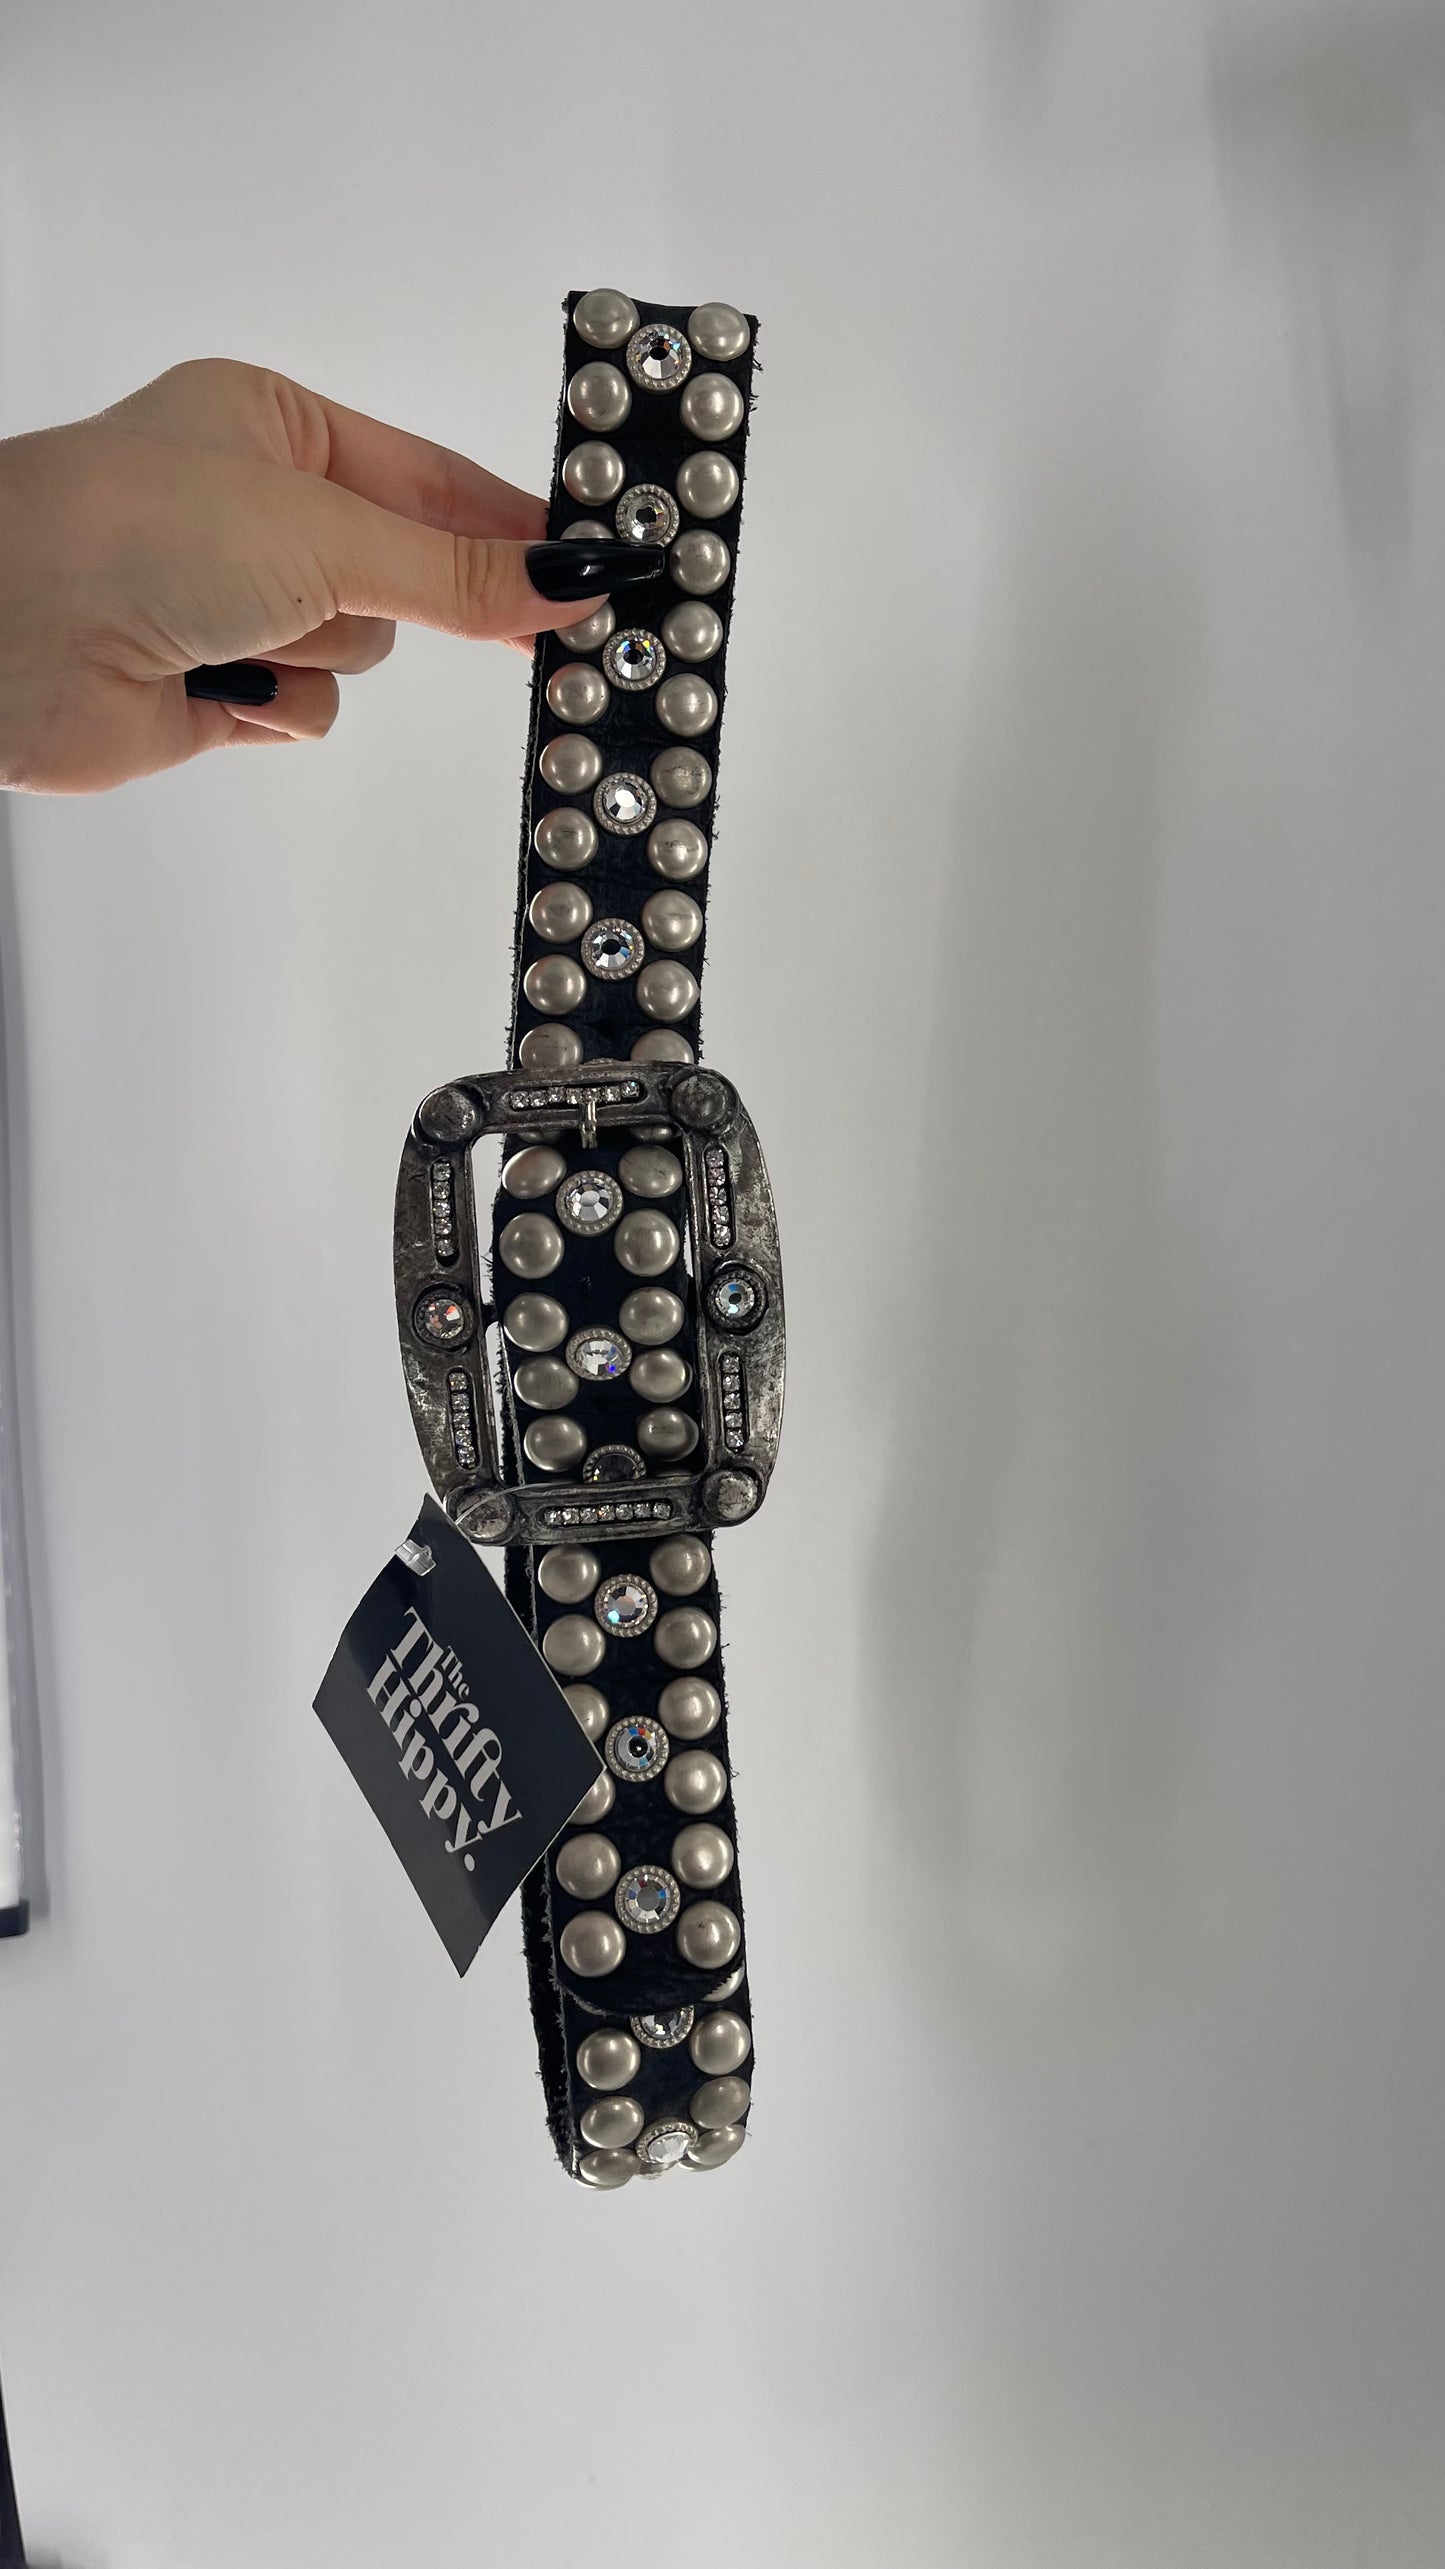 Vintage NEW Swarovski Crystal Iconic Cowboy Belt with Studded Leather Detailing (Small)